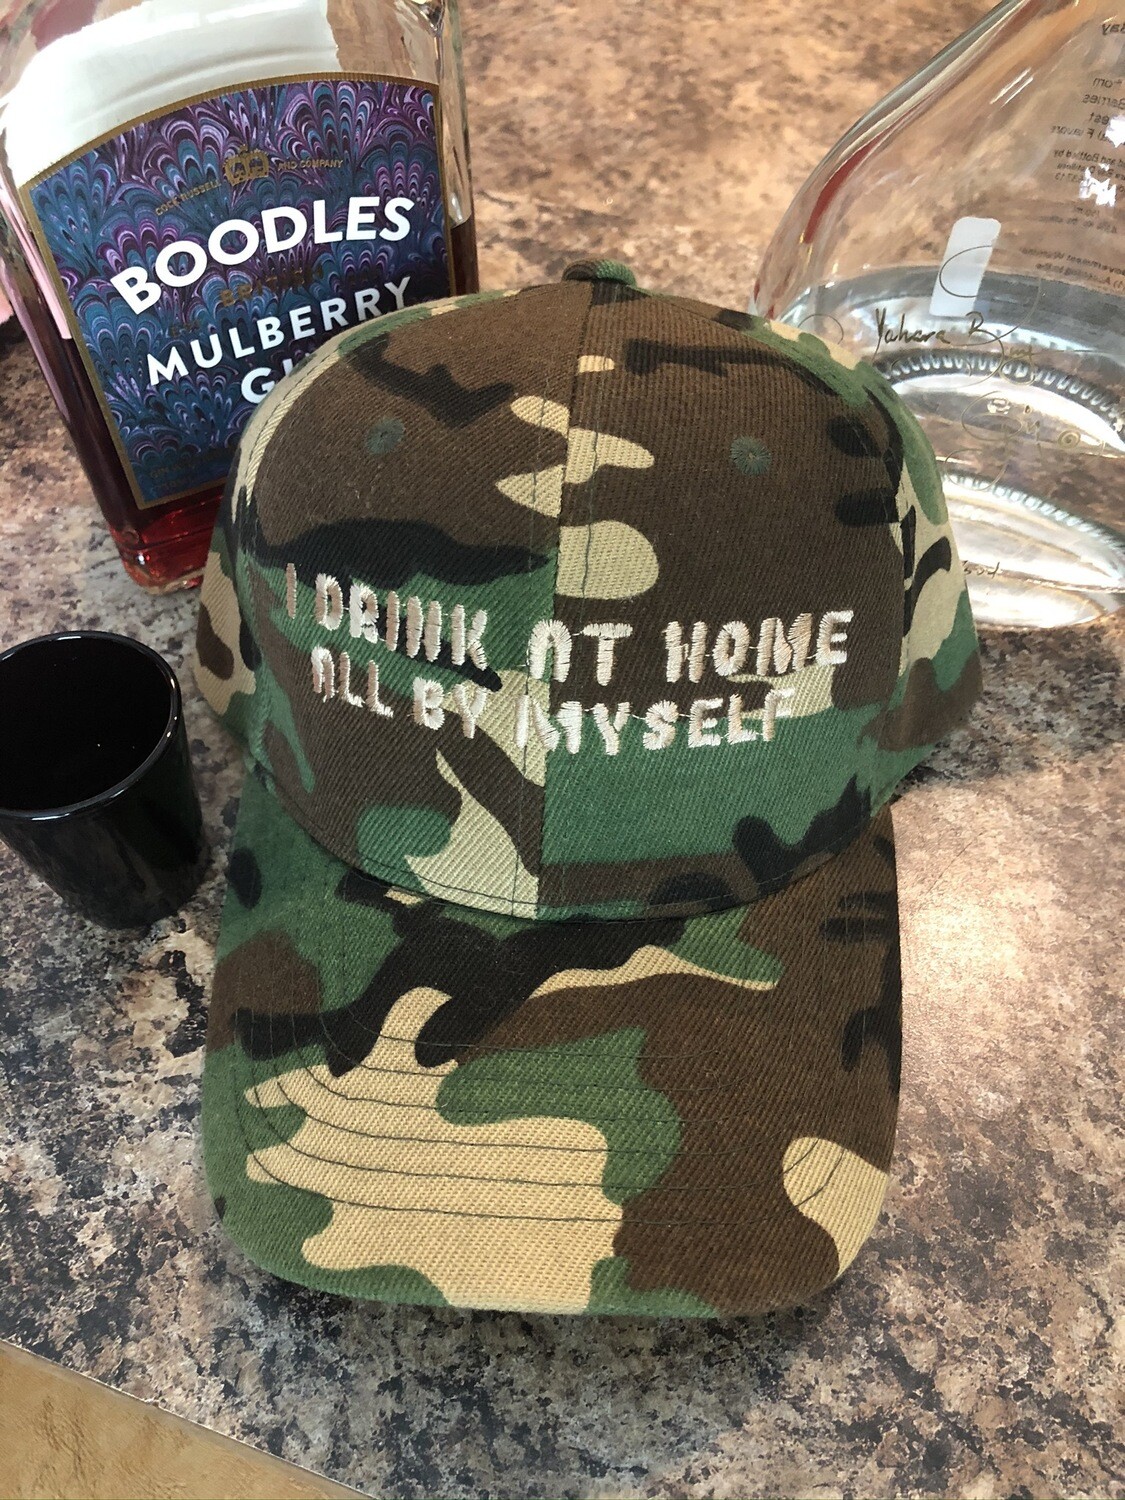 Custom embroidered hats